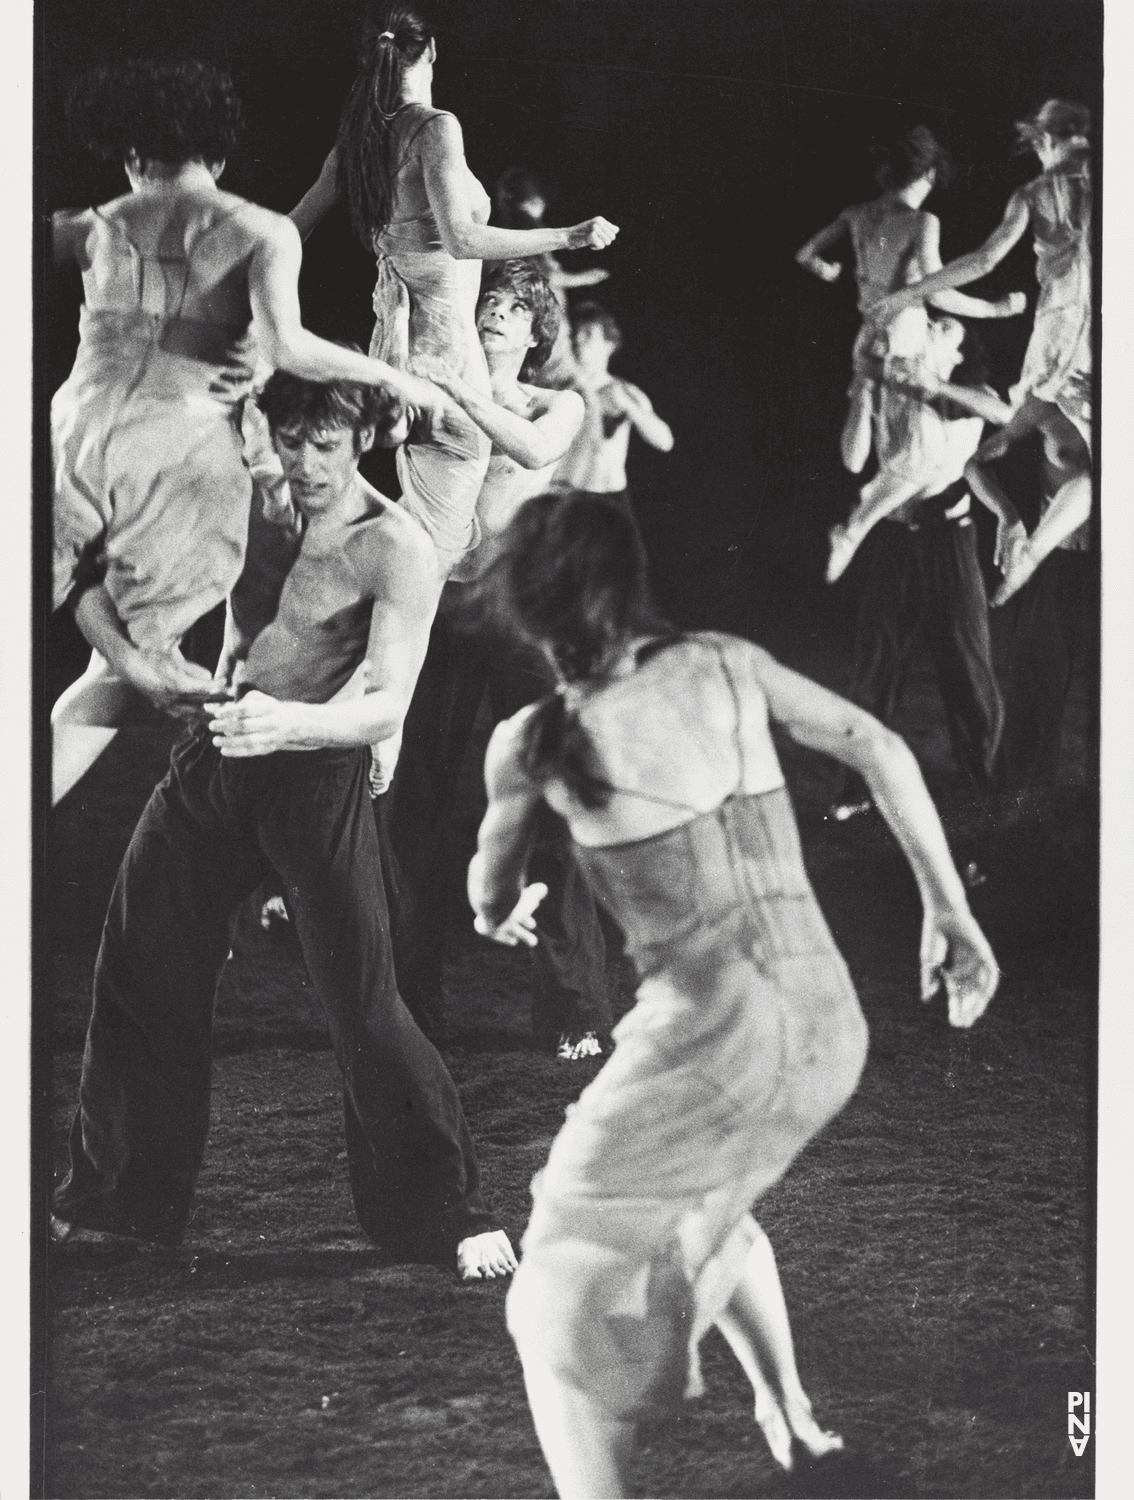 Ed Kortlandt in “The Rite of Spring” by Pina Bausch